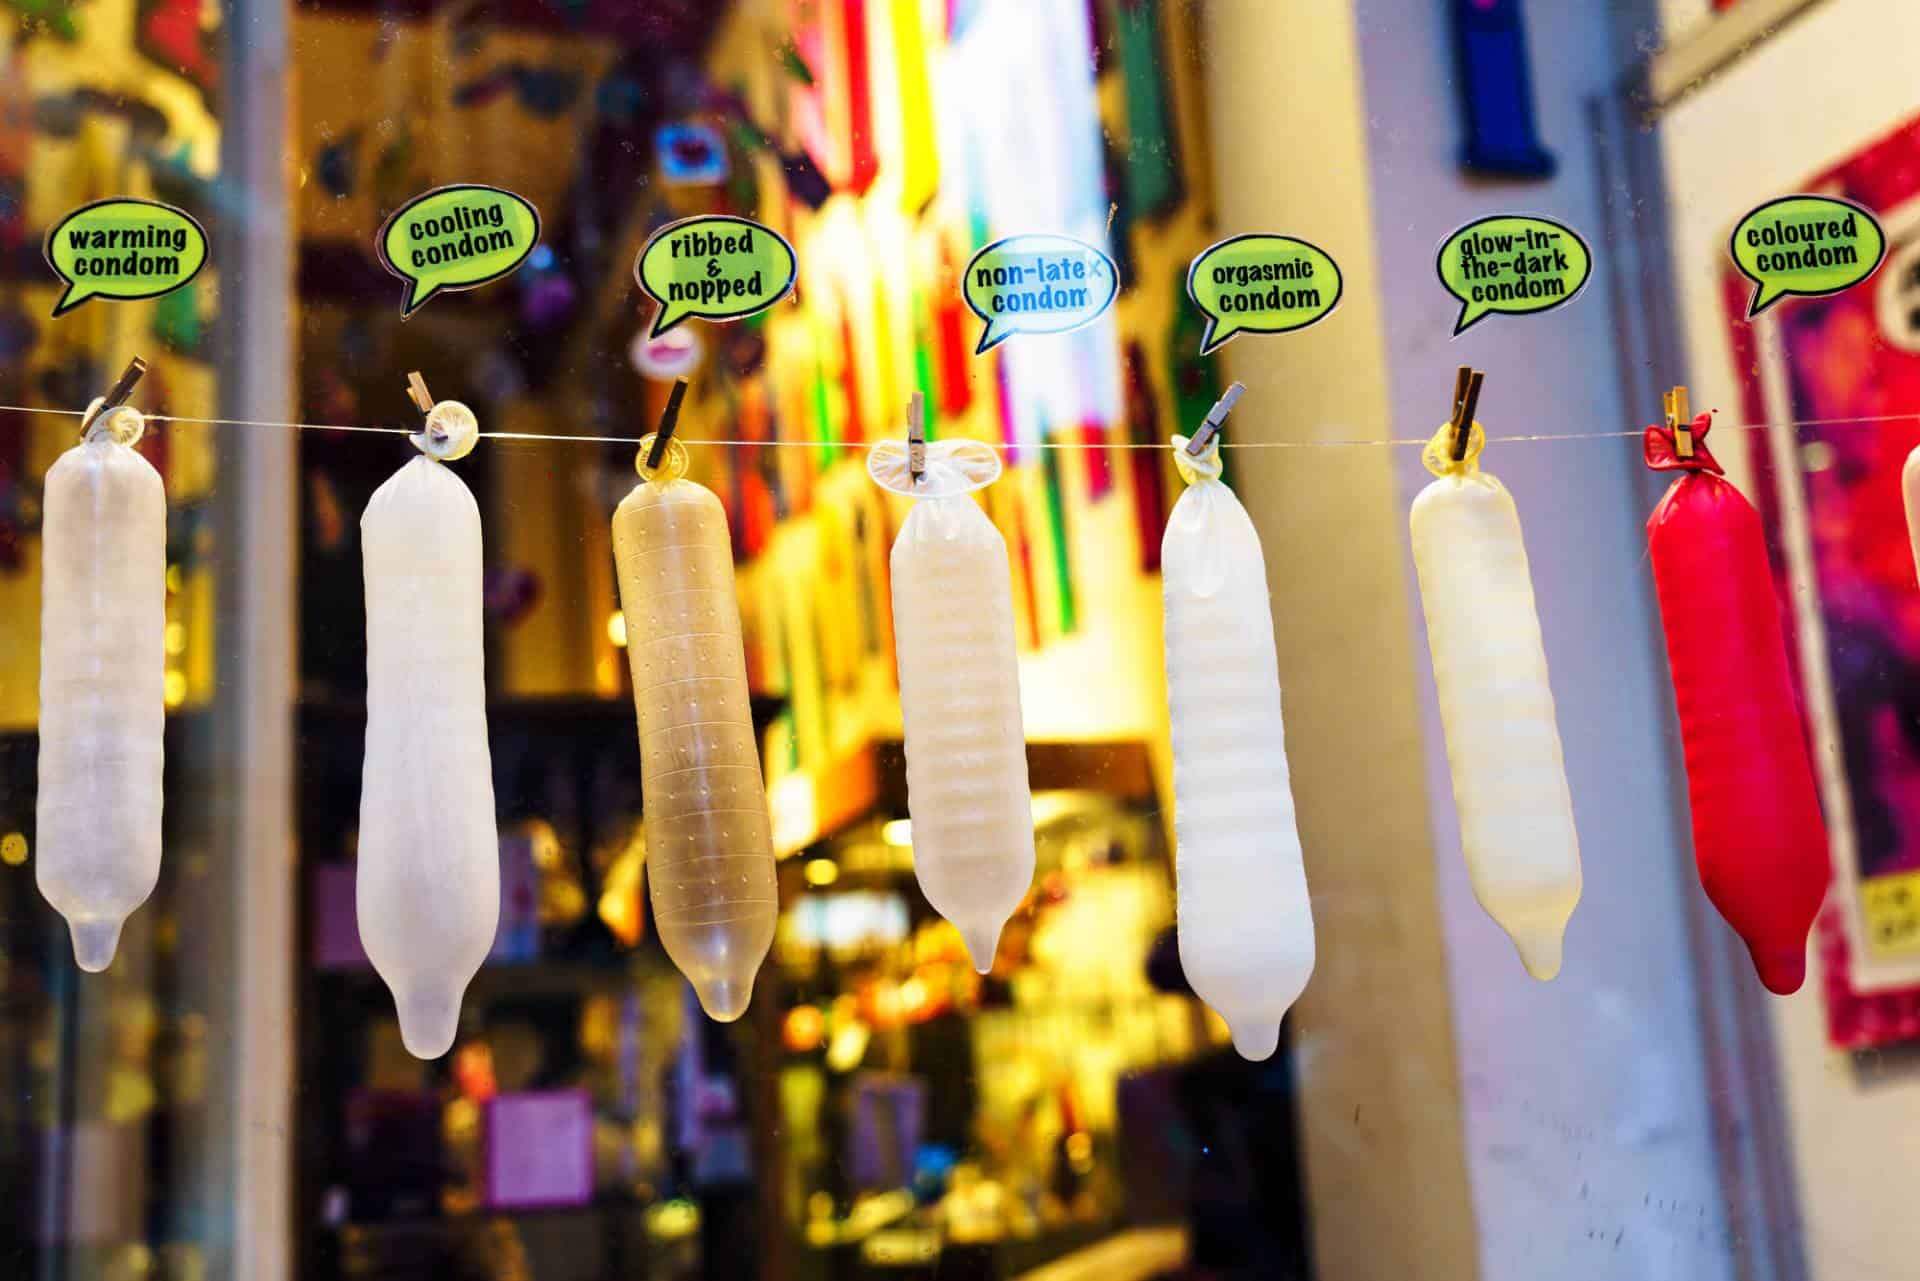 All kinds of condoms on display at a condom shop in Amsterdam's Red Light District.